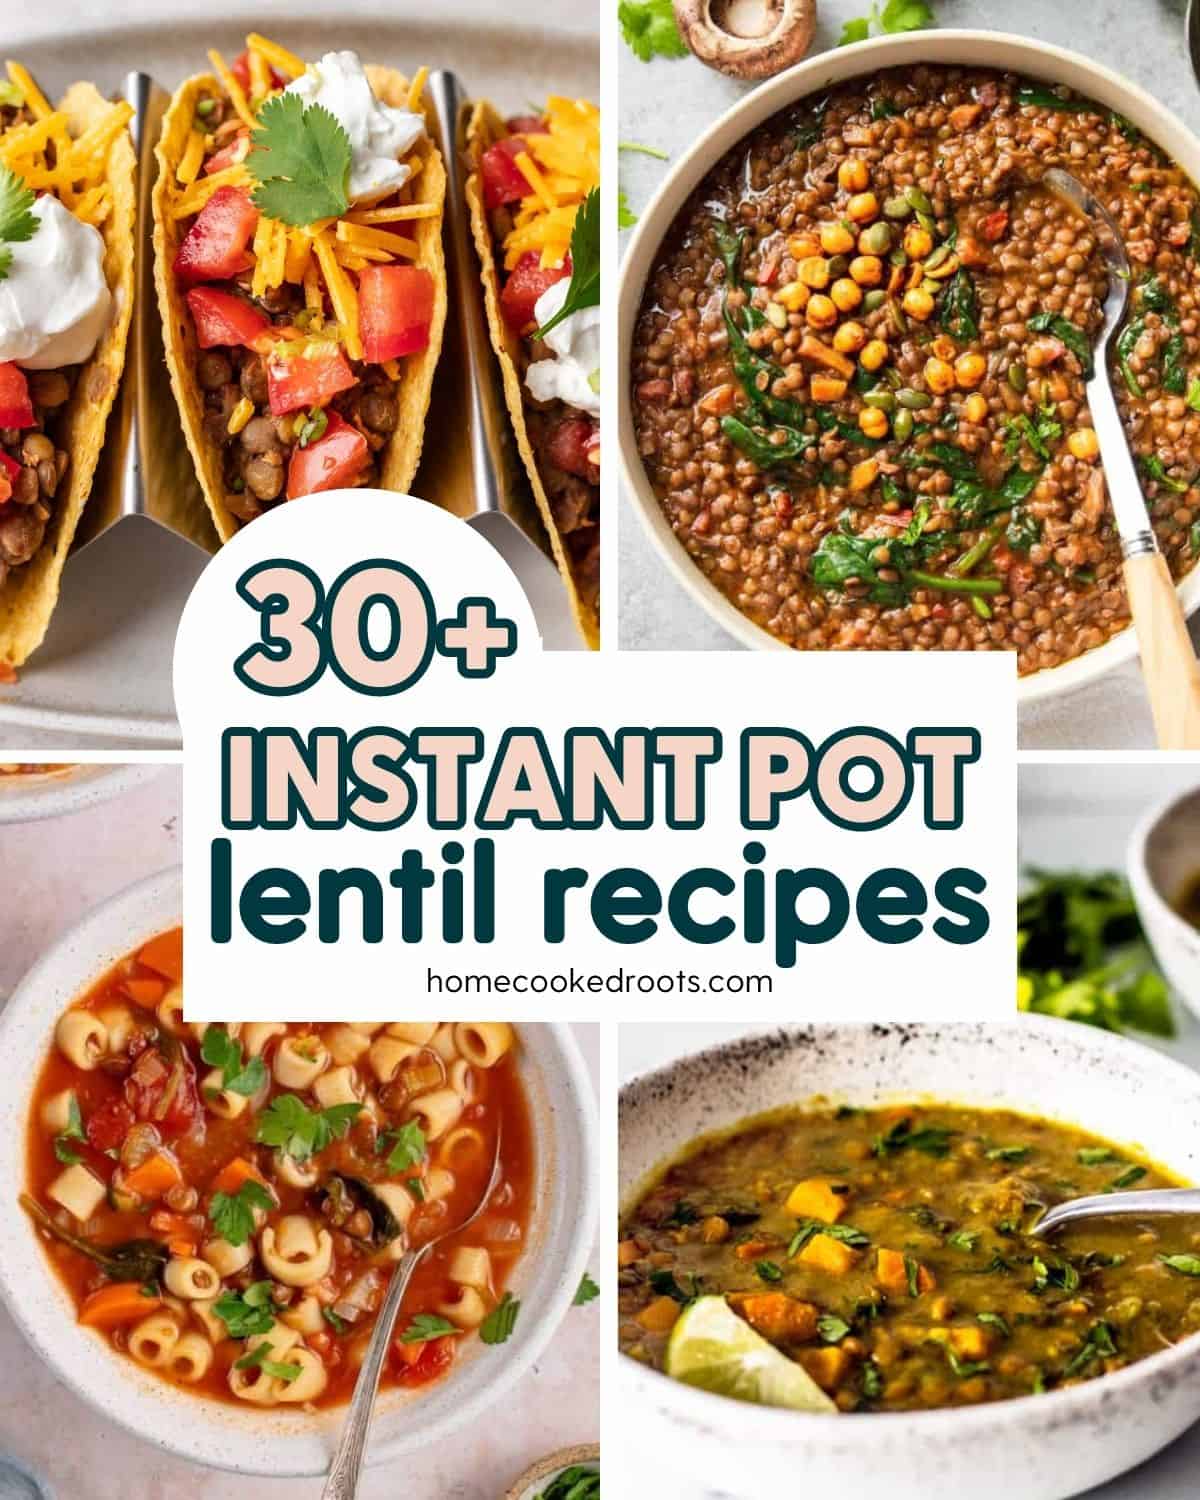 Collage of 4 Instant Pot recipes that use lentils with text graphic that says 30+ Instant Pot Lentil Recipes. 